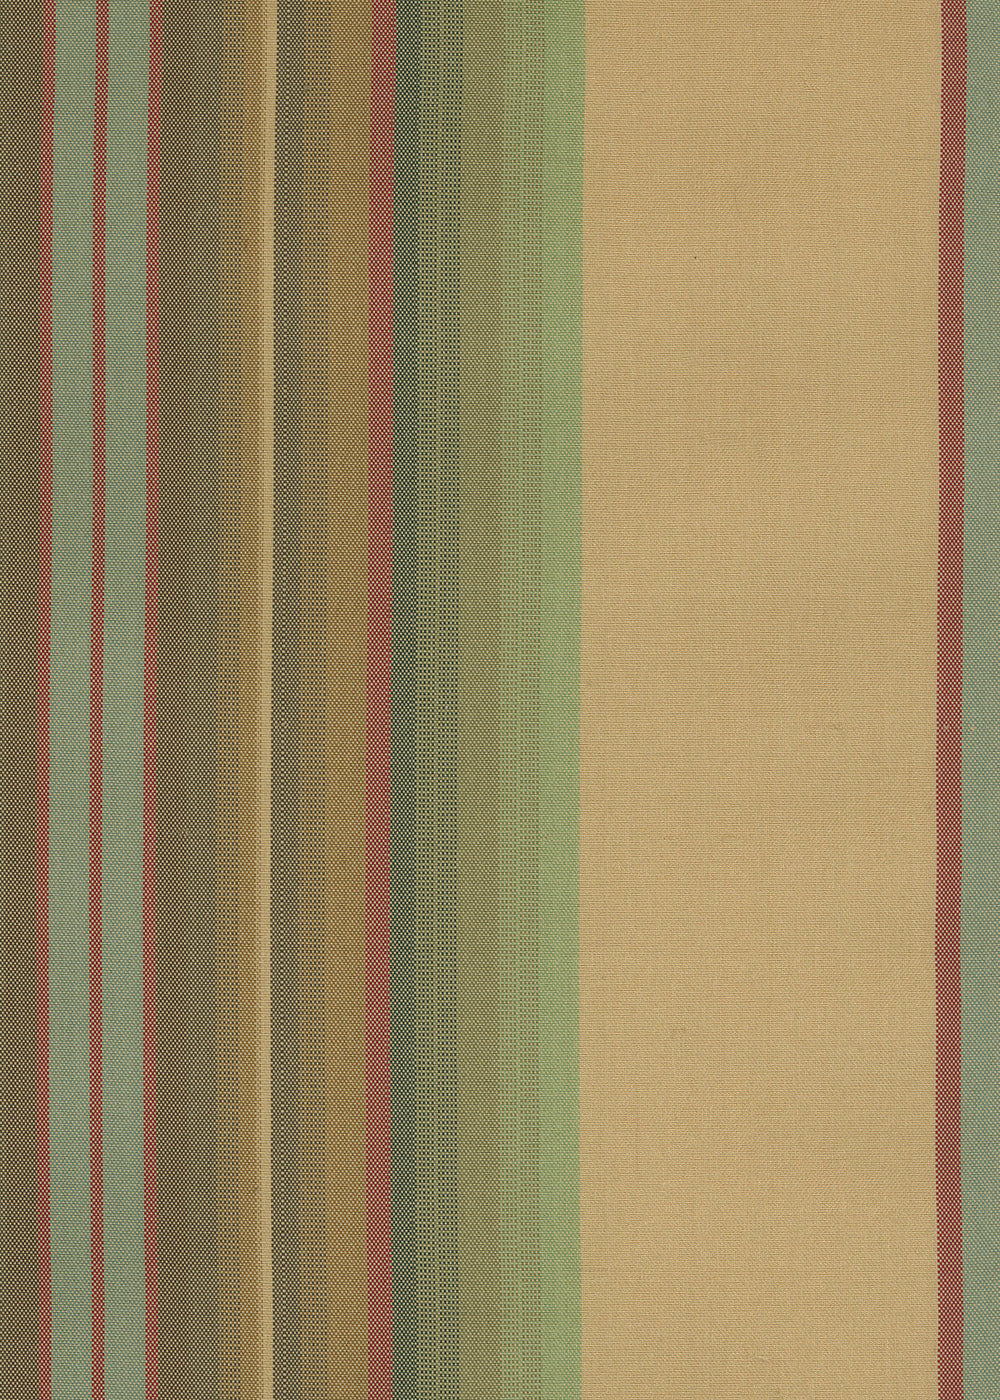 striped fabric with gold, green, and red